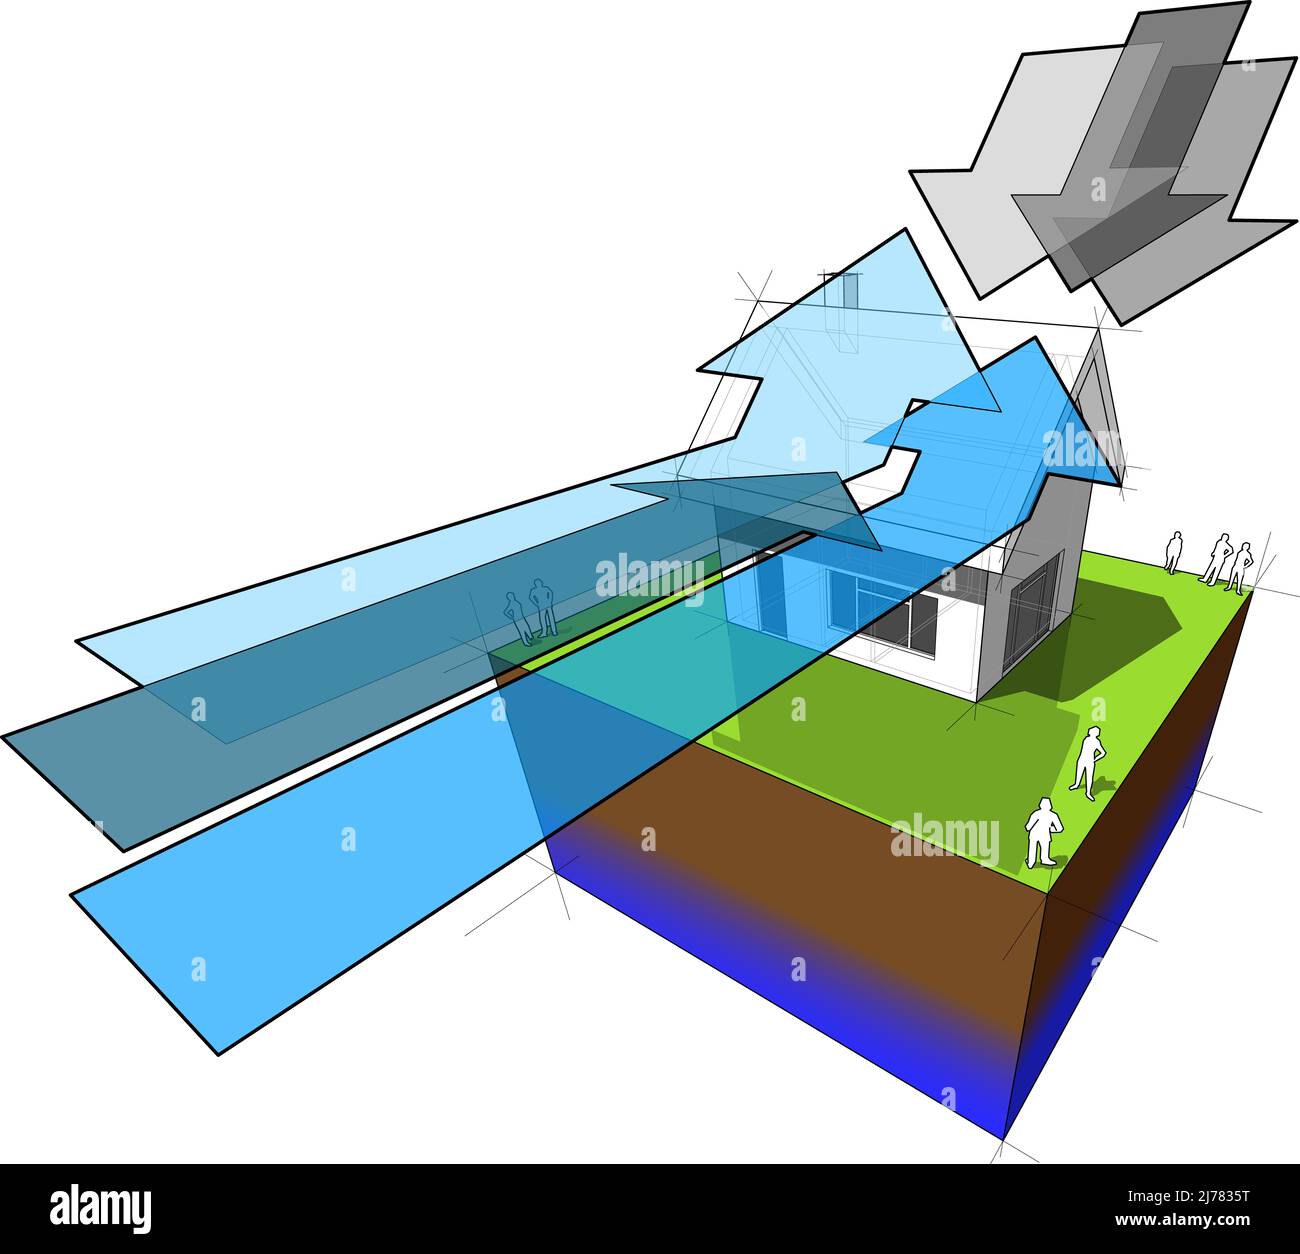 diagram of a simple detached house and arrows symbolising wind and rain or icefall Stock Photo